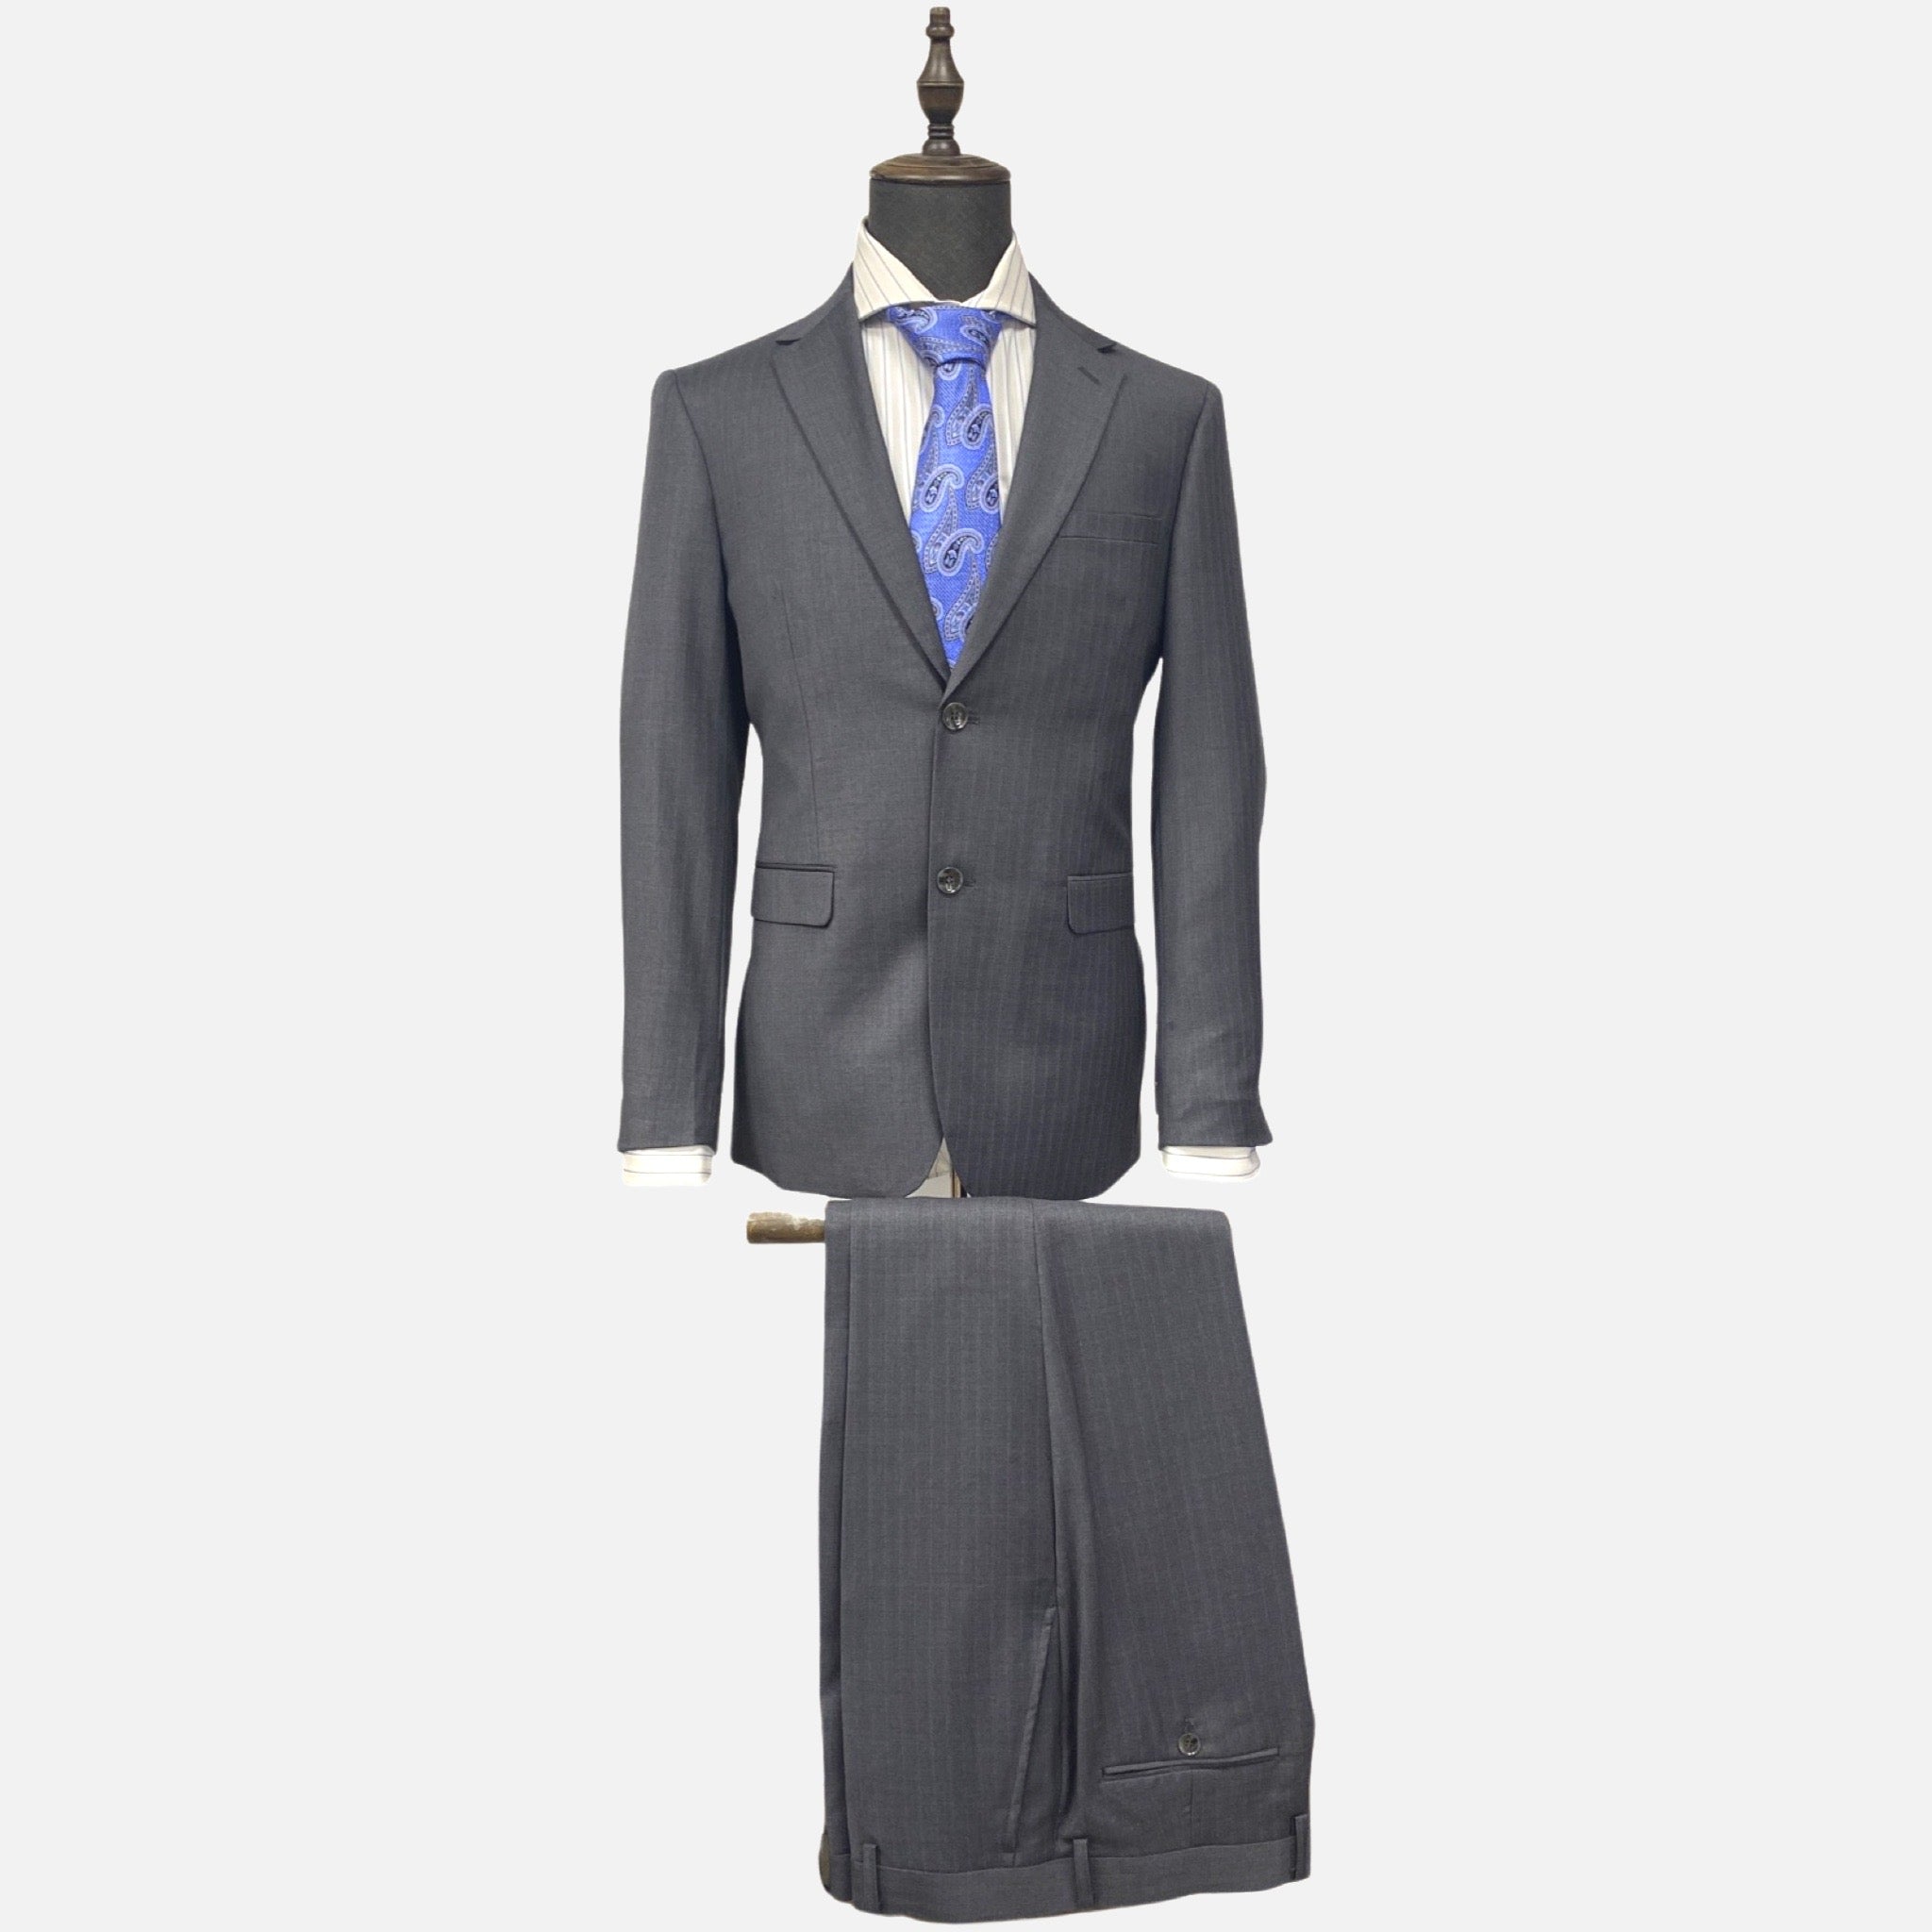 Sophisticated Elegance: Gray Pinstriped Suit with Subtle Blue Stripes | Slim Fit